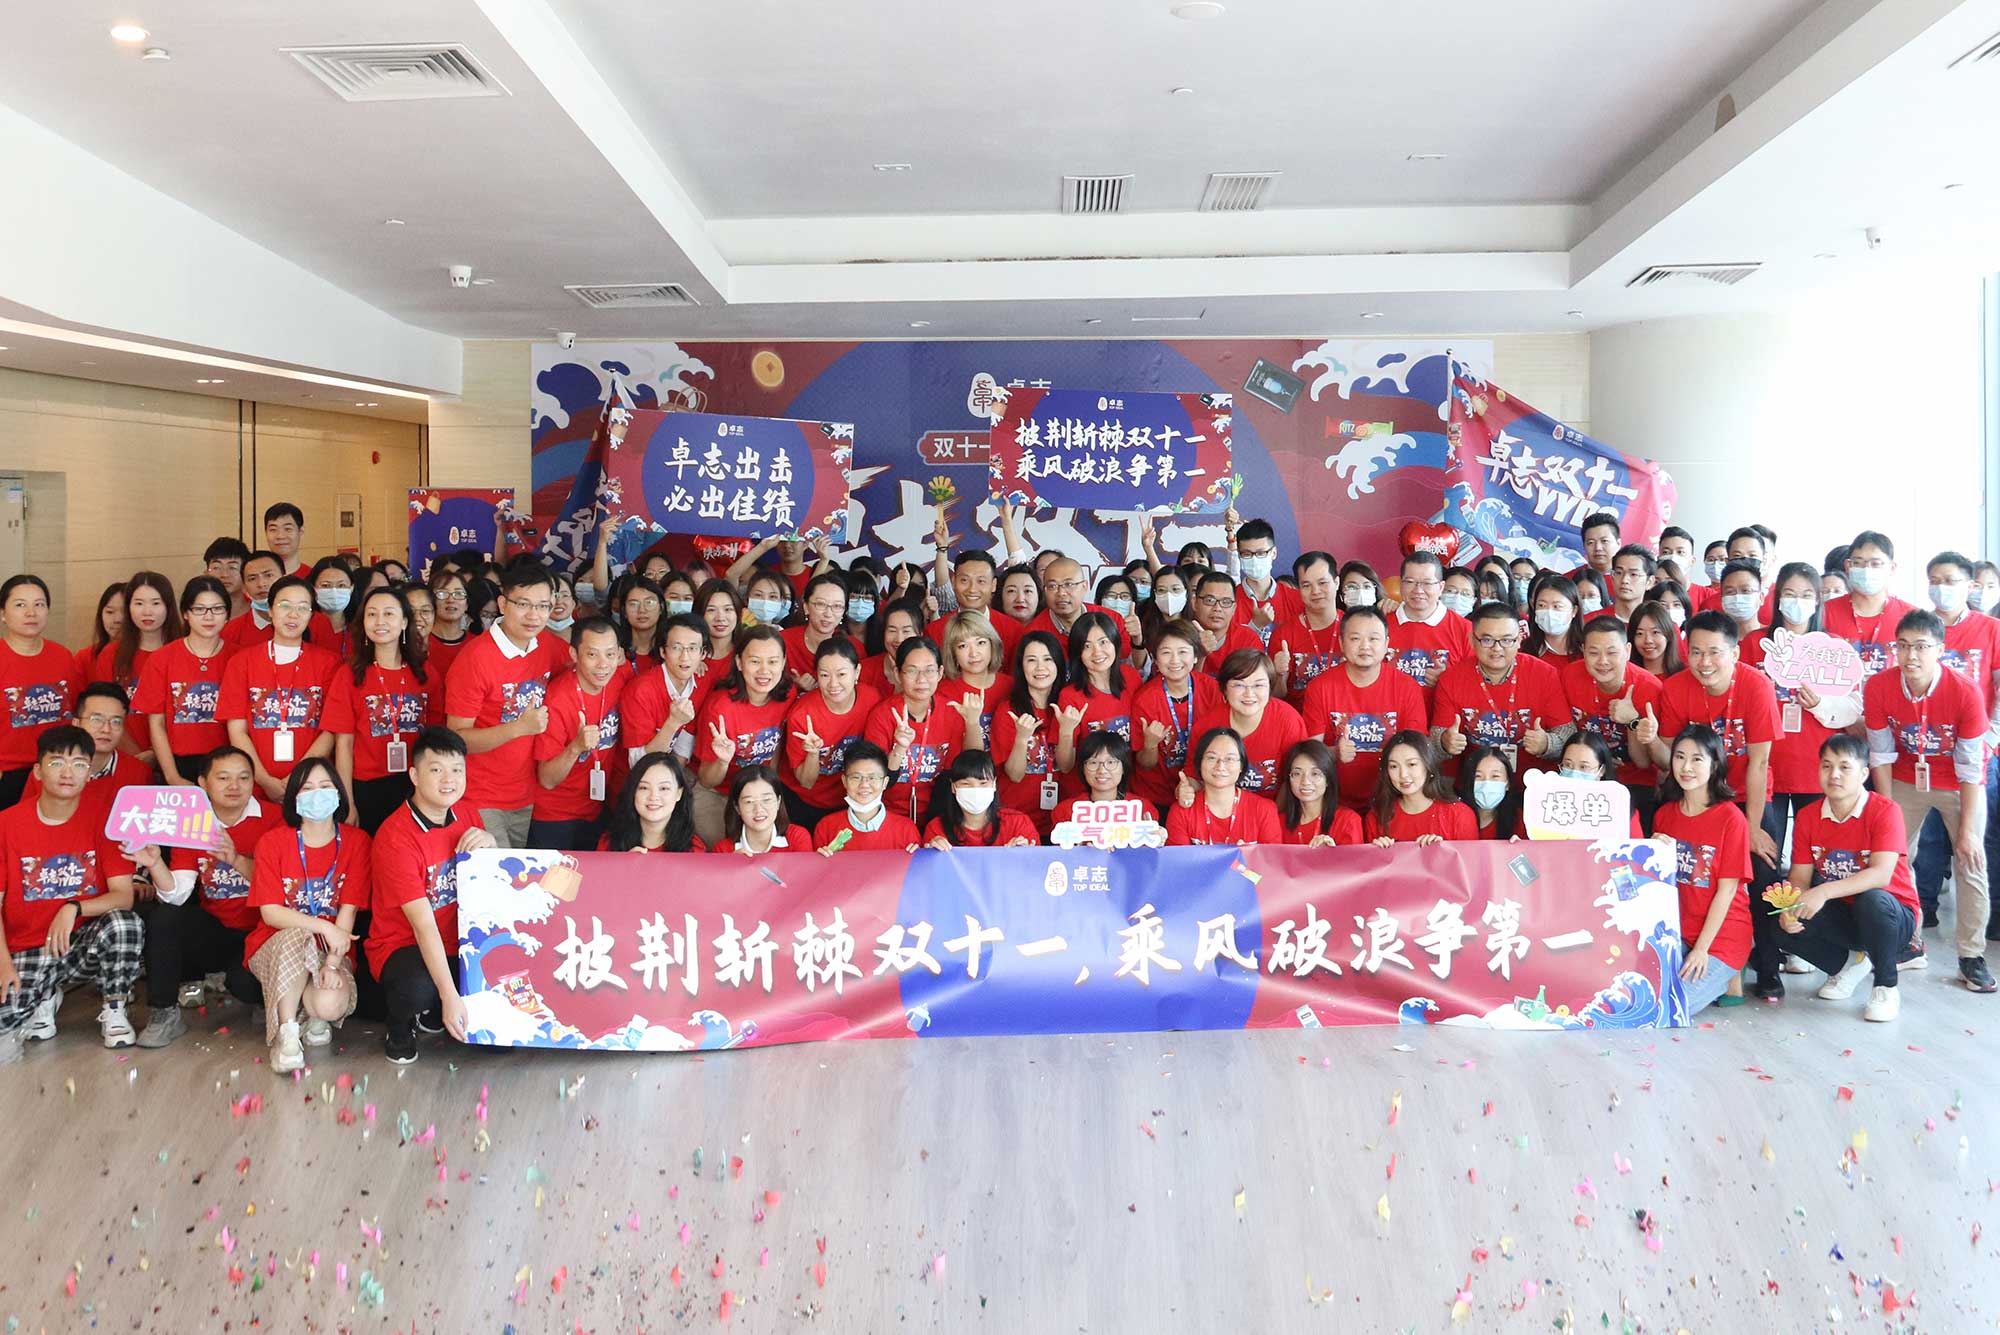 Top Ideal Double 11 Online Shopping Festival Kick-Off Meeting